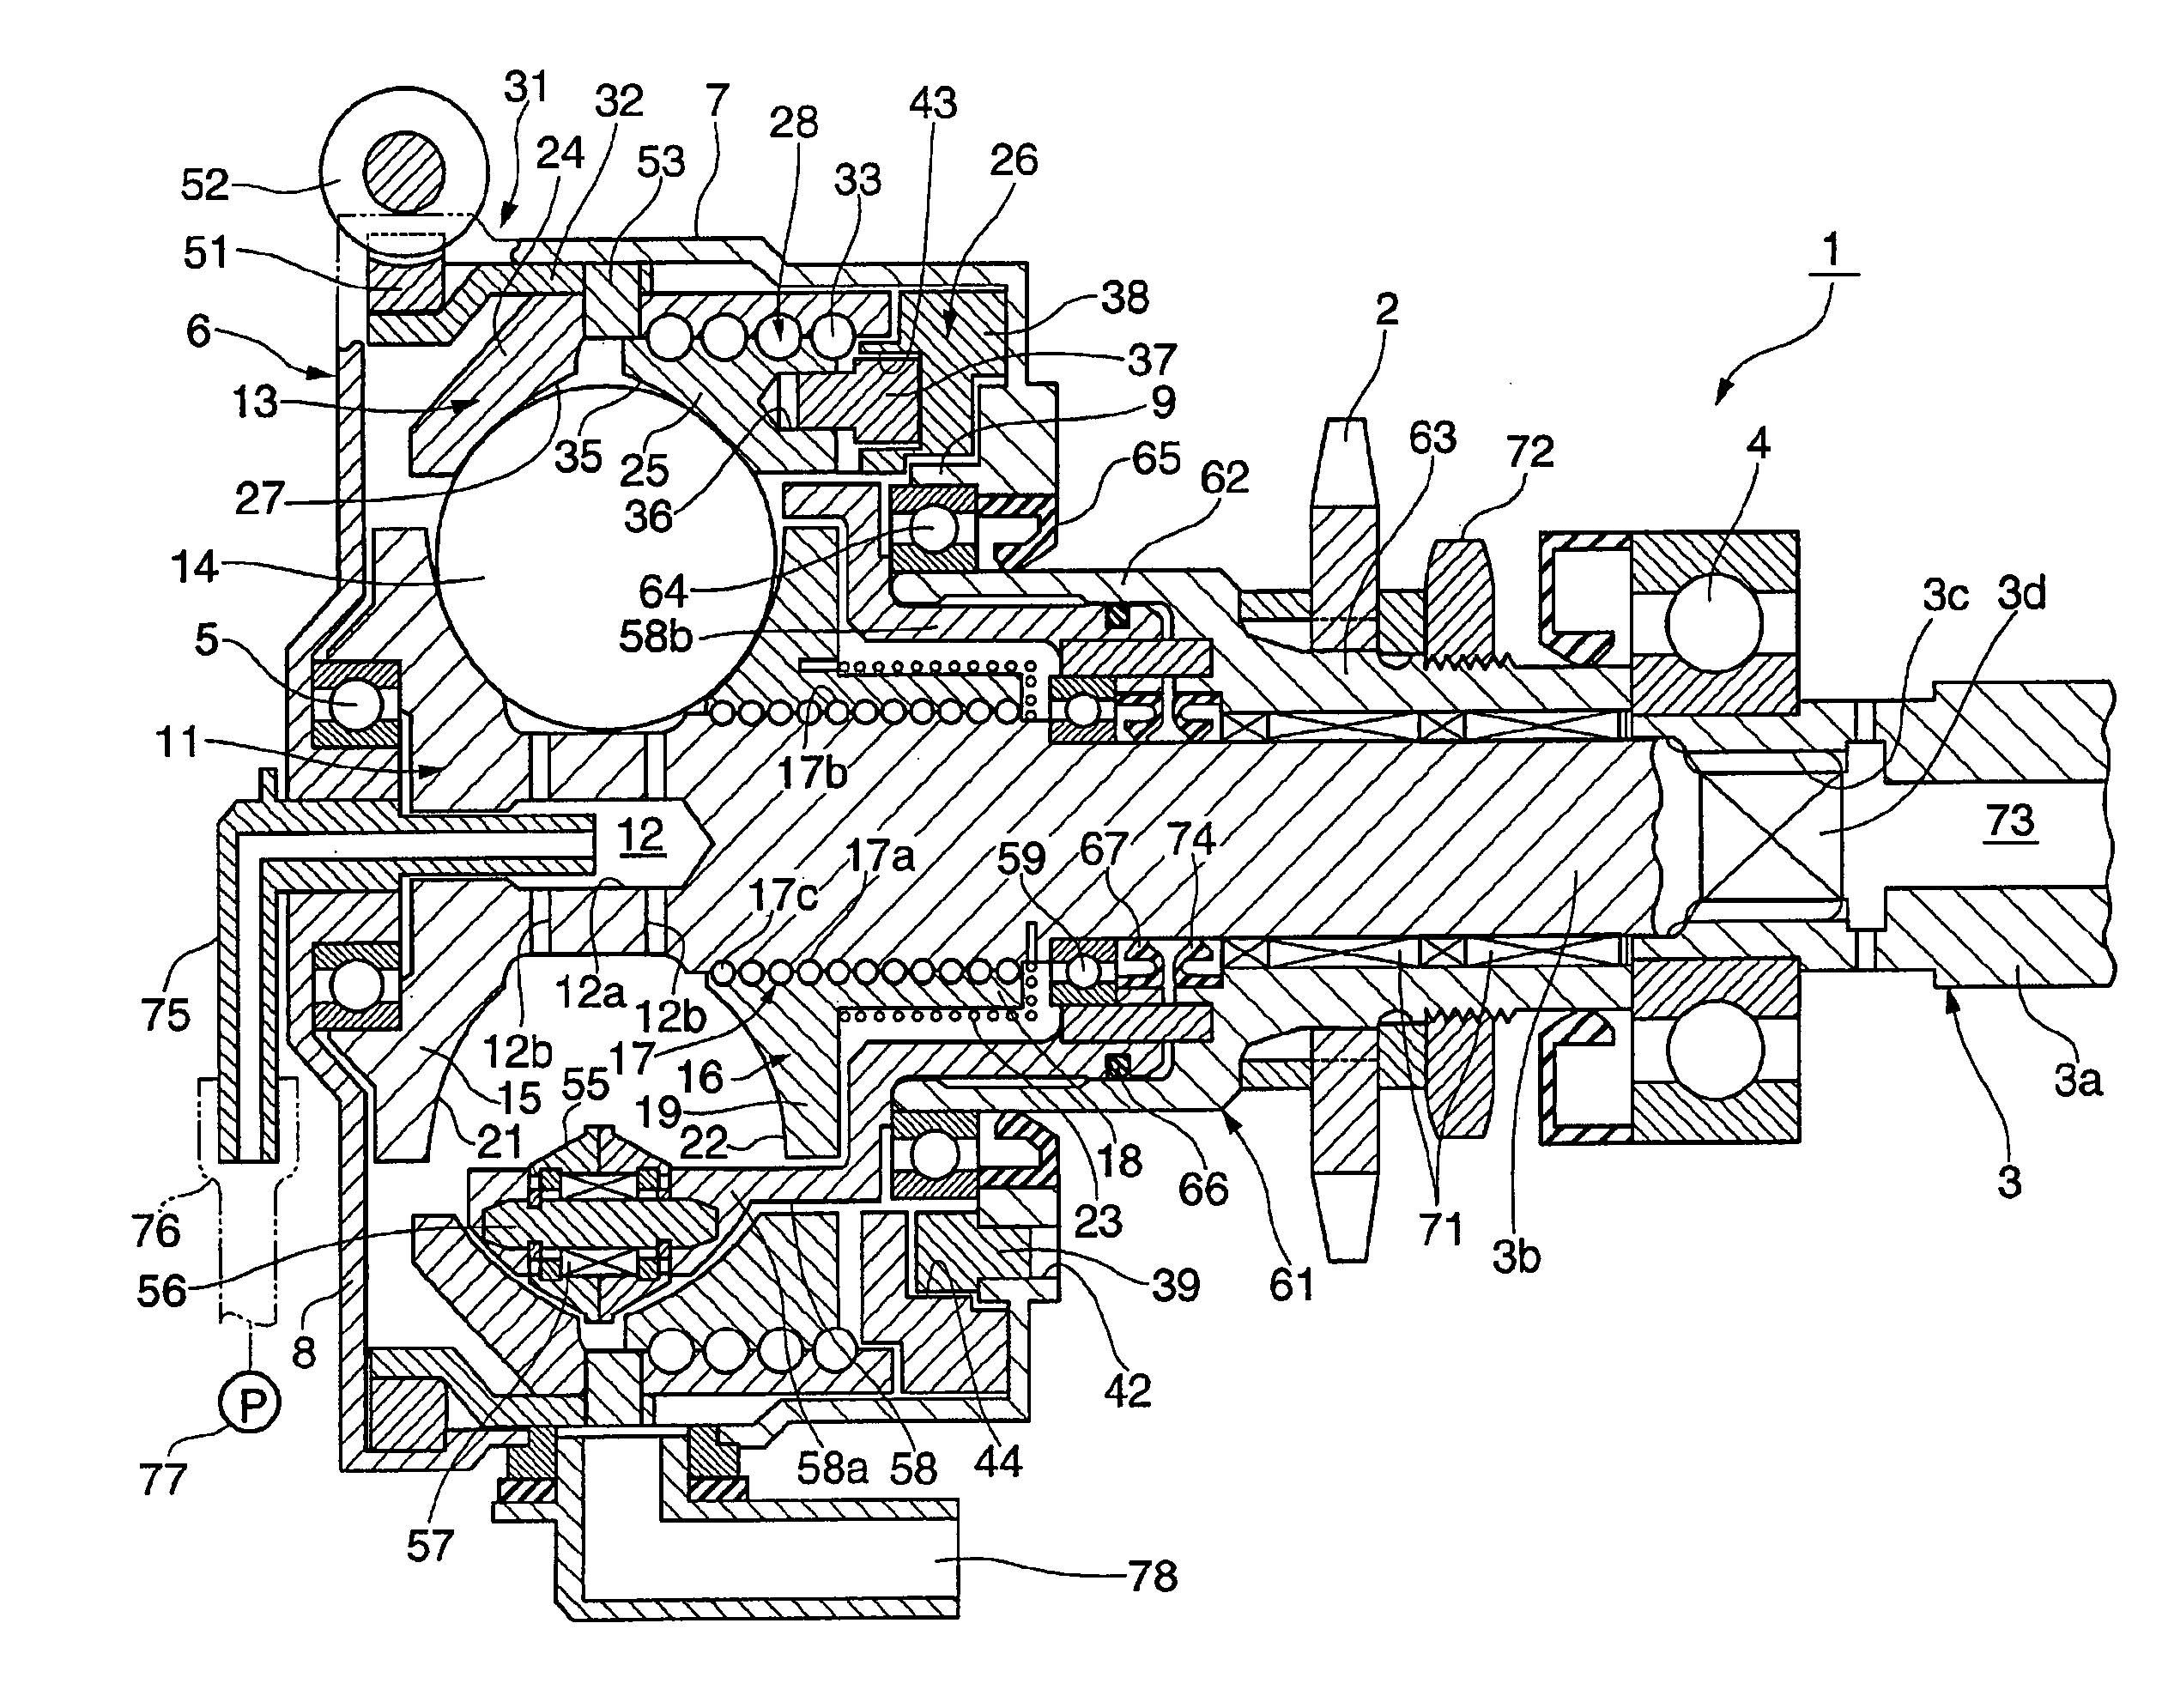 Continuously variable transmission and engine